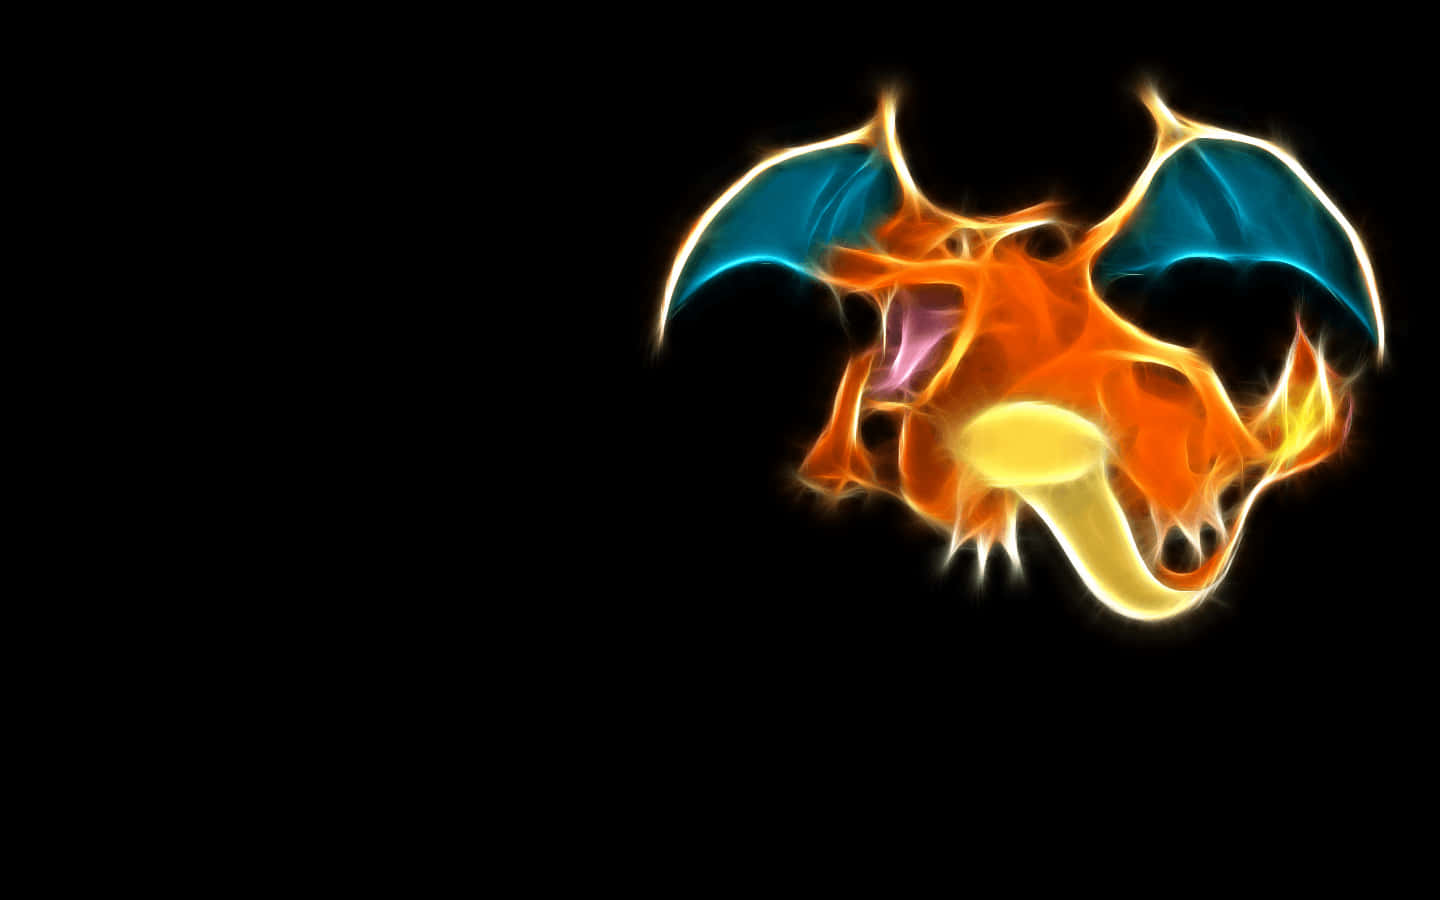 "This Epic Charizard Looks Ready to Take On Any Challenge!" Wallpaper